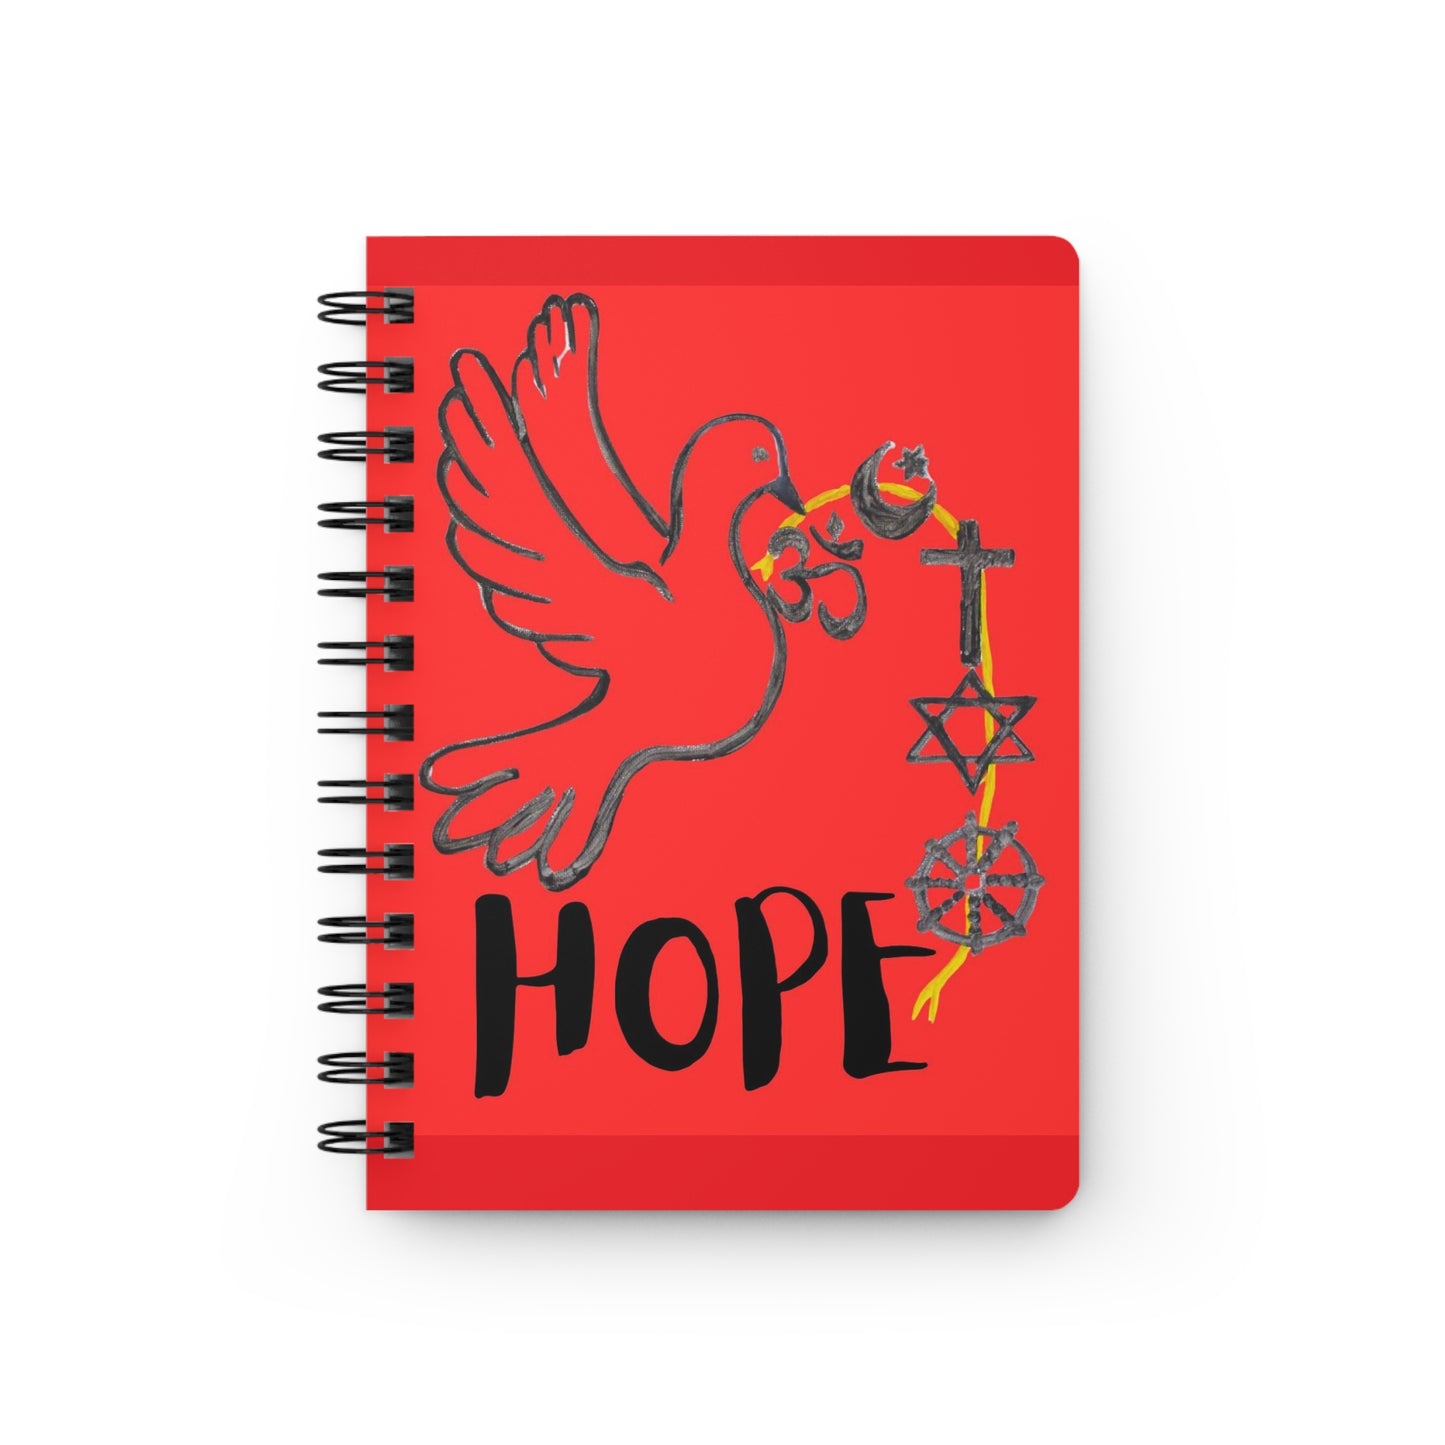 Hope - Spiral Bound Journal -Red - Holiday Notepad